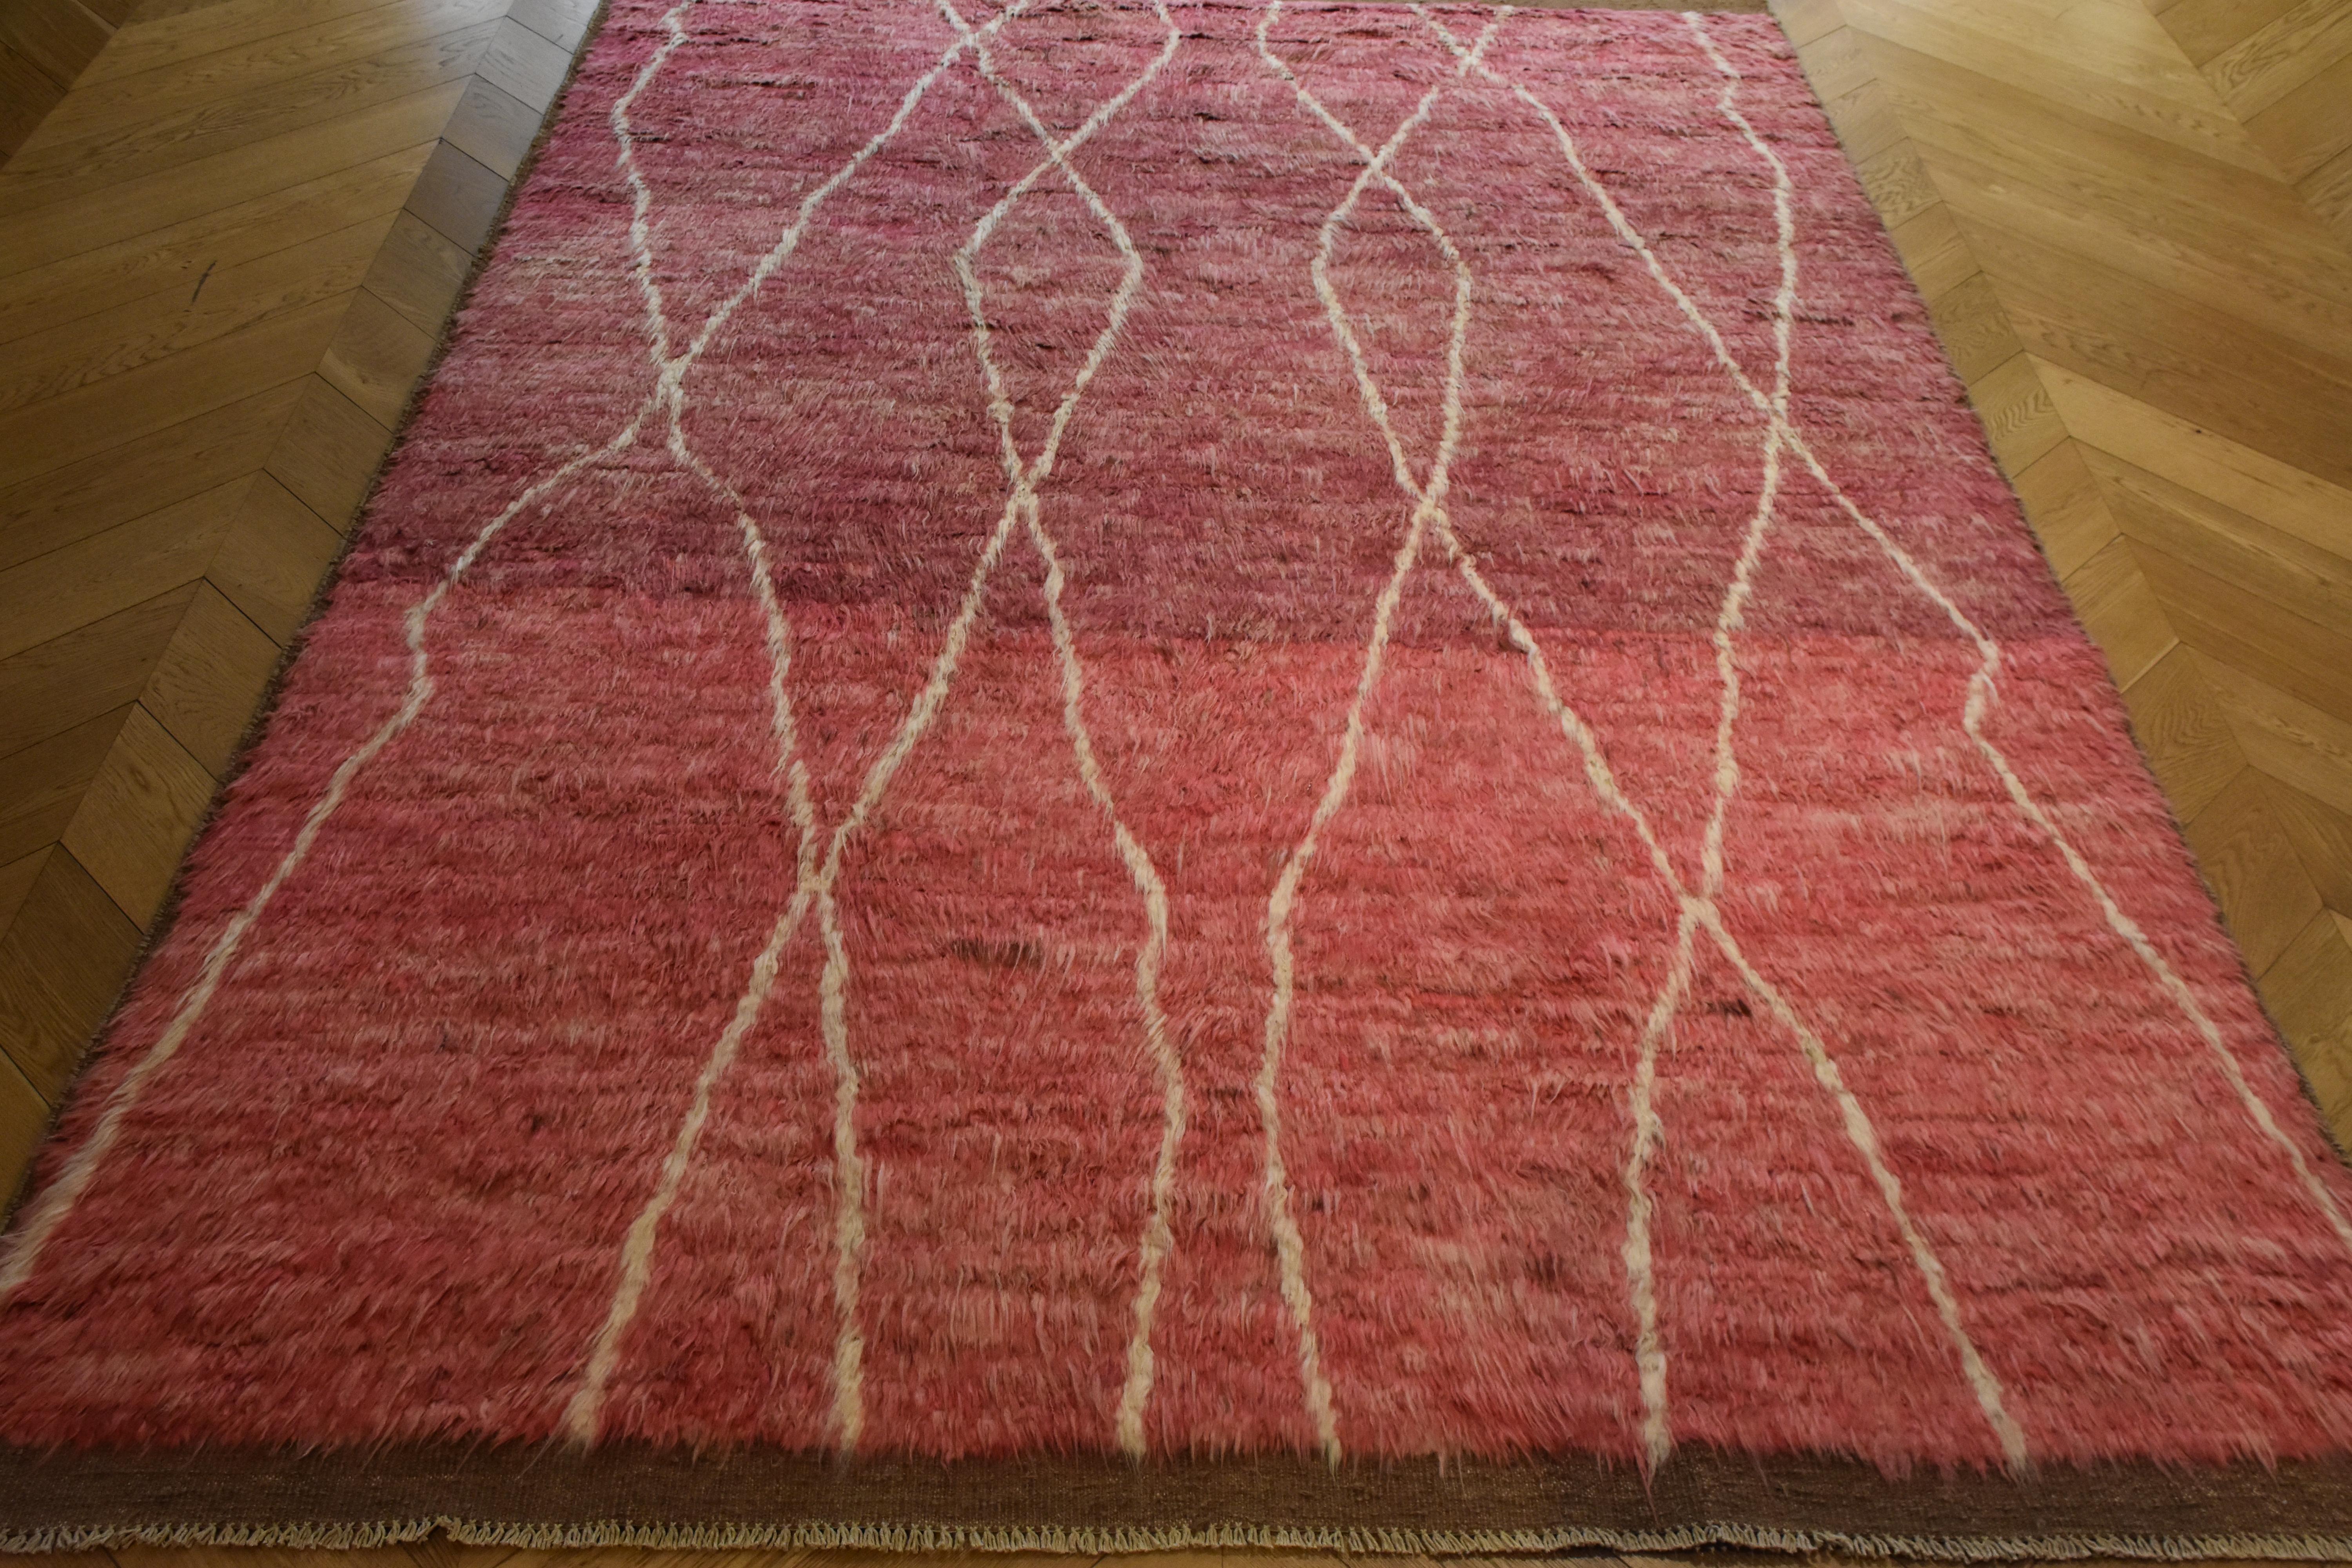 These carpets come from the villages of Afghanistan. Their characteristic is the very long and soft hair of wool and the Minimalist decoration that draws inspiration from the tradition of nomadic populations. The wools are hand dyed with natural and